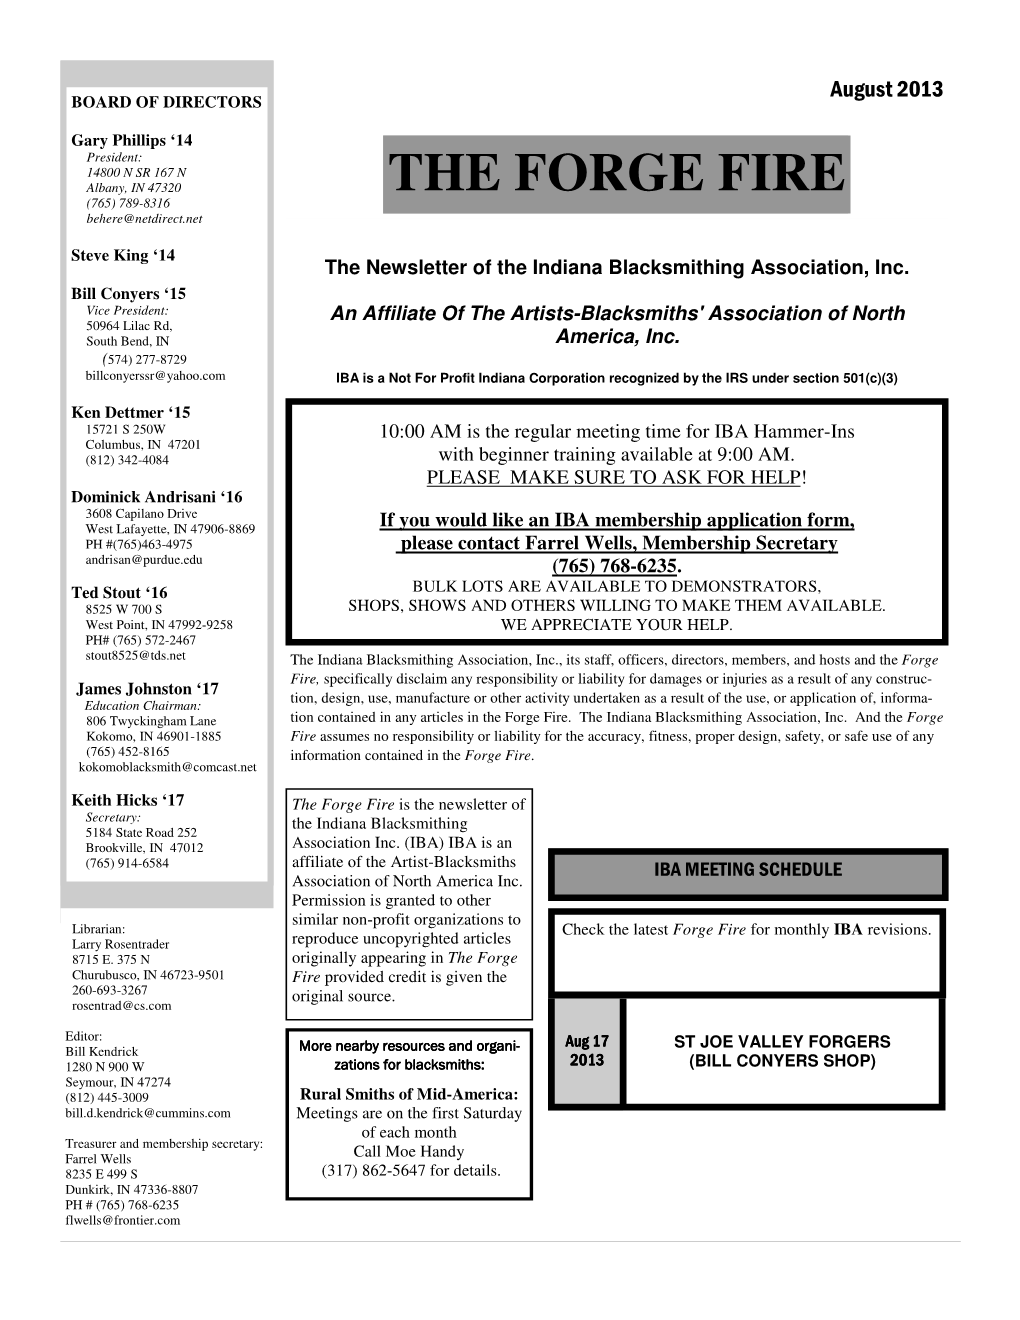 THE FORGE FIRE (765) 789-8316 Behere@Netdirect.Net